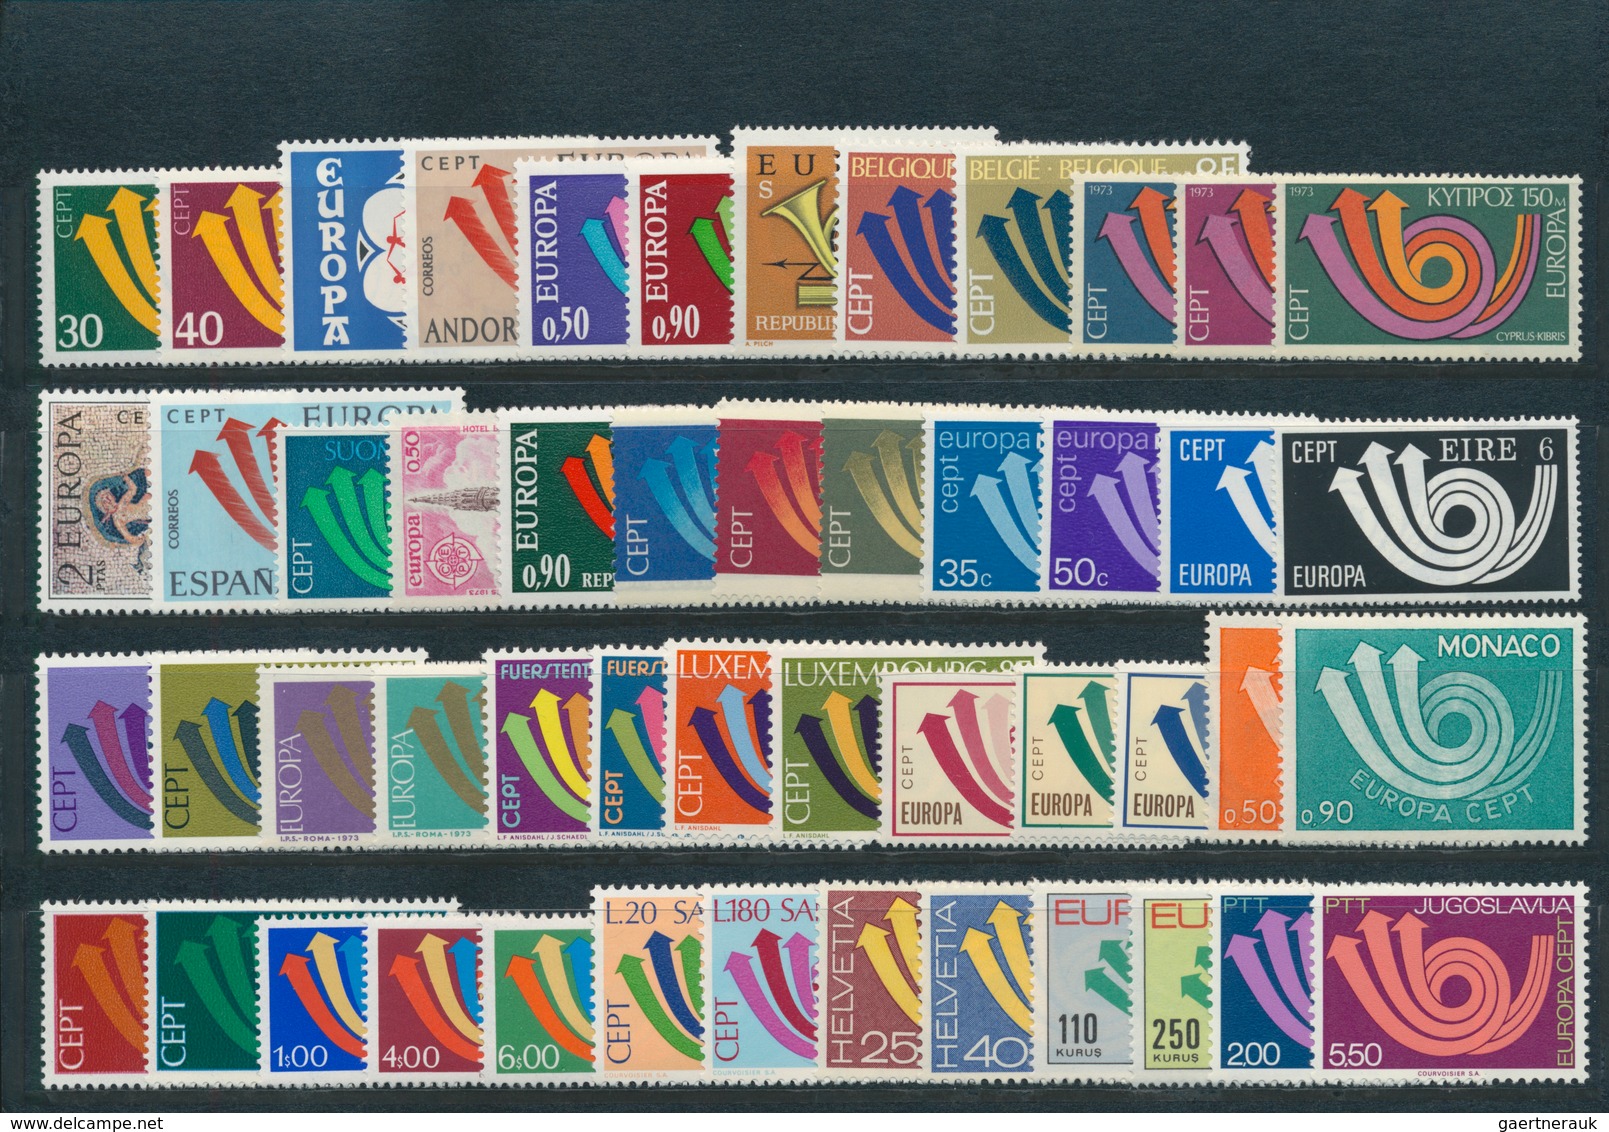 Europa-Union (CEPT): Mint never hinged collection of the joint issues; complete in the main numbers;